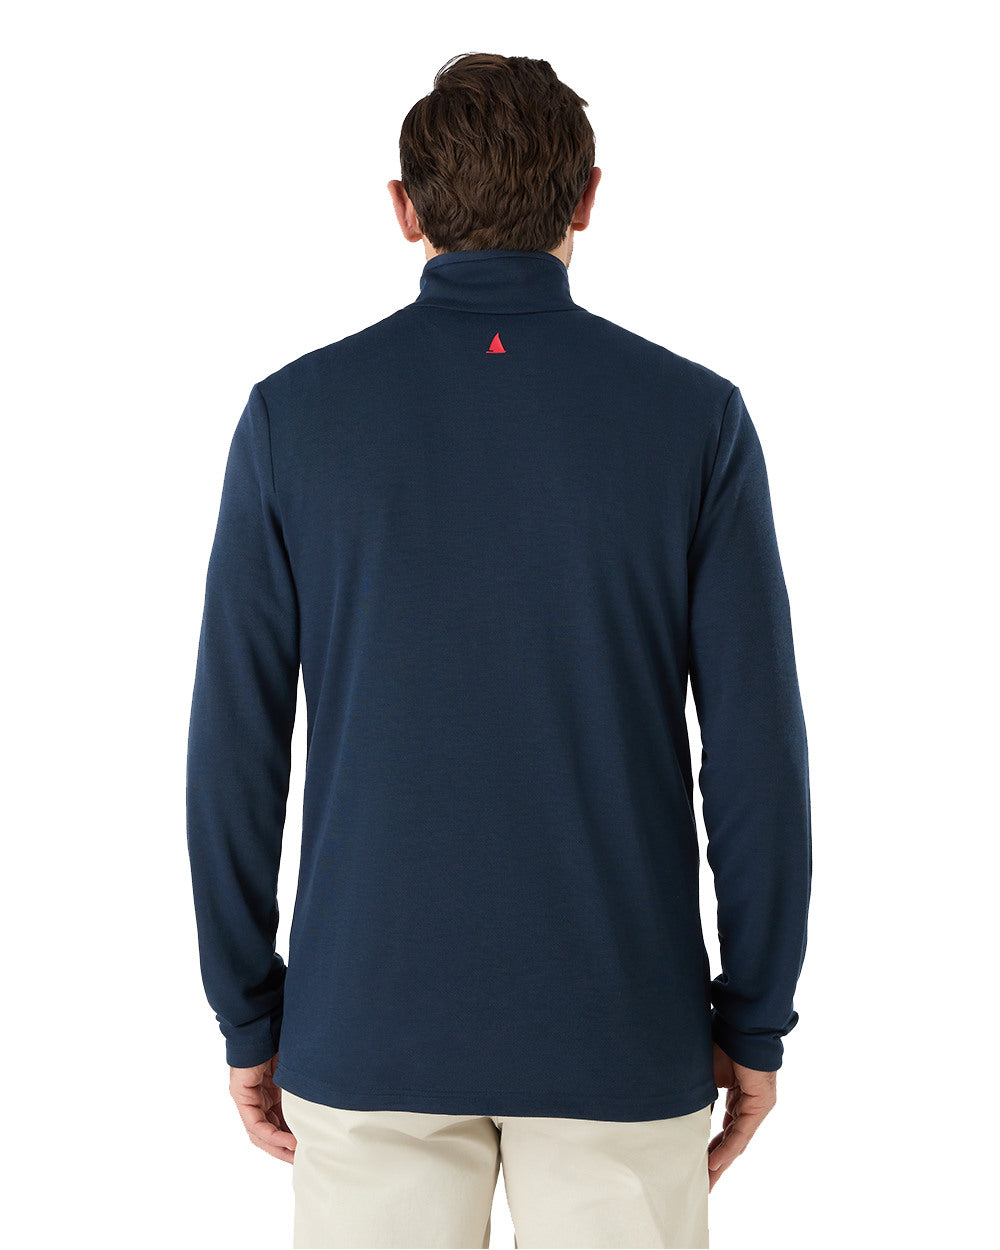 Navy Coloured Musto Mens Fast Dry Half Zip Top On A White Background 